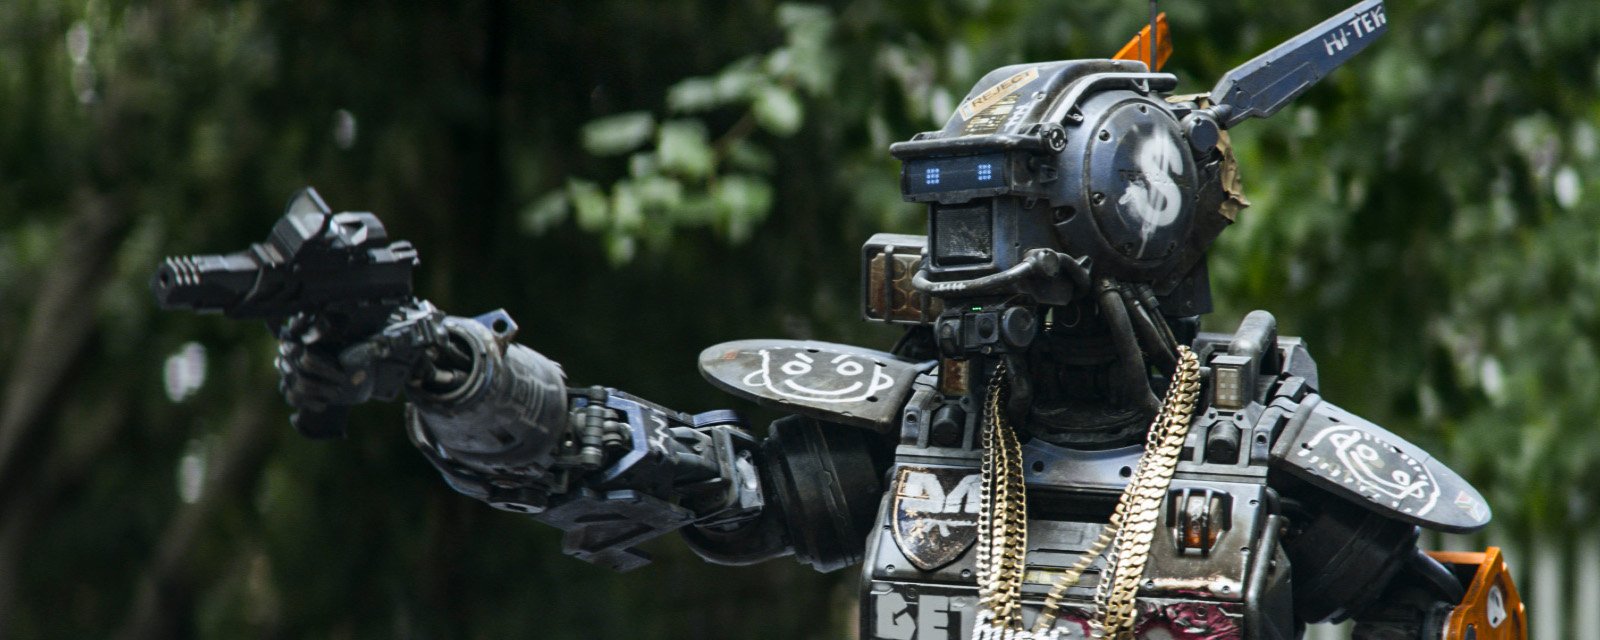 ***SUNDAY CALENDAR  STORY FOR JANUARY 11, 2014. DO NOT USE PRIOR TO PUBLICATION**********Chappie (Sharlto Copley) from Columbia Pictures' action-adventure movie CHAPPIE.